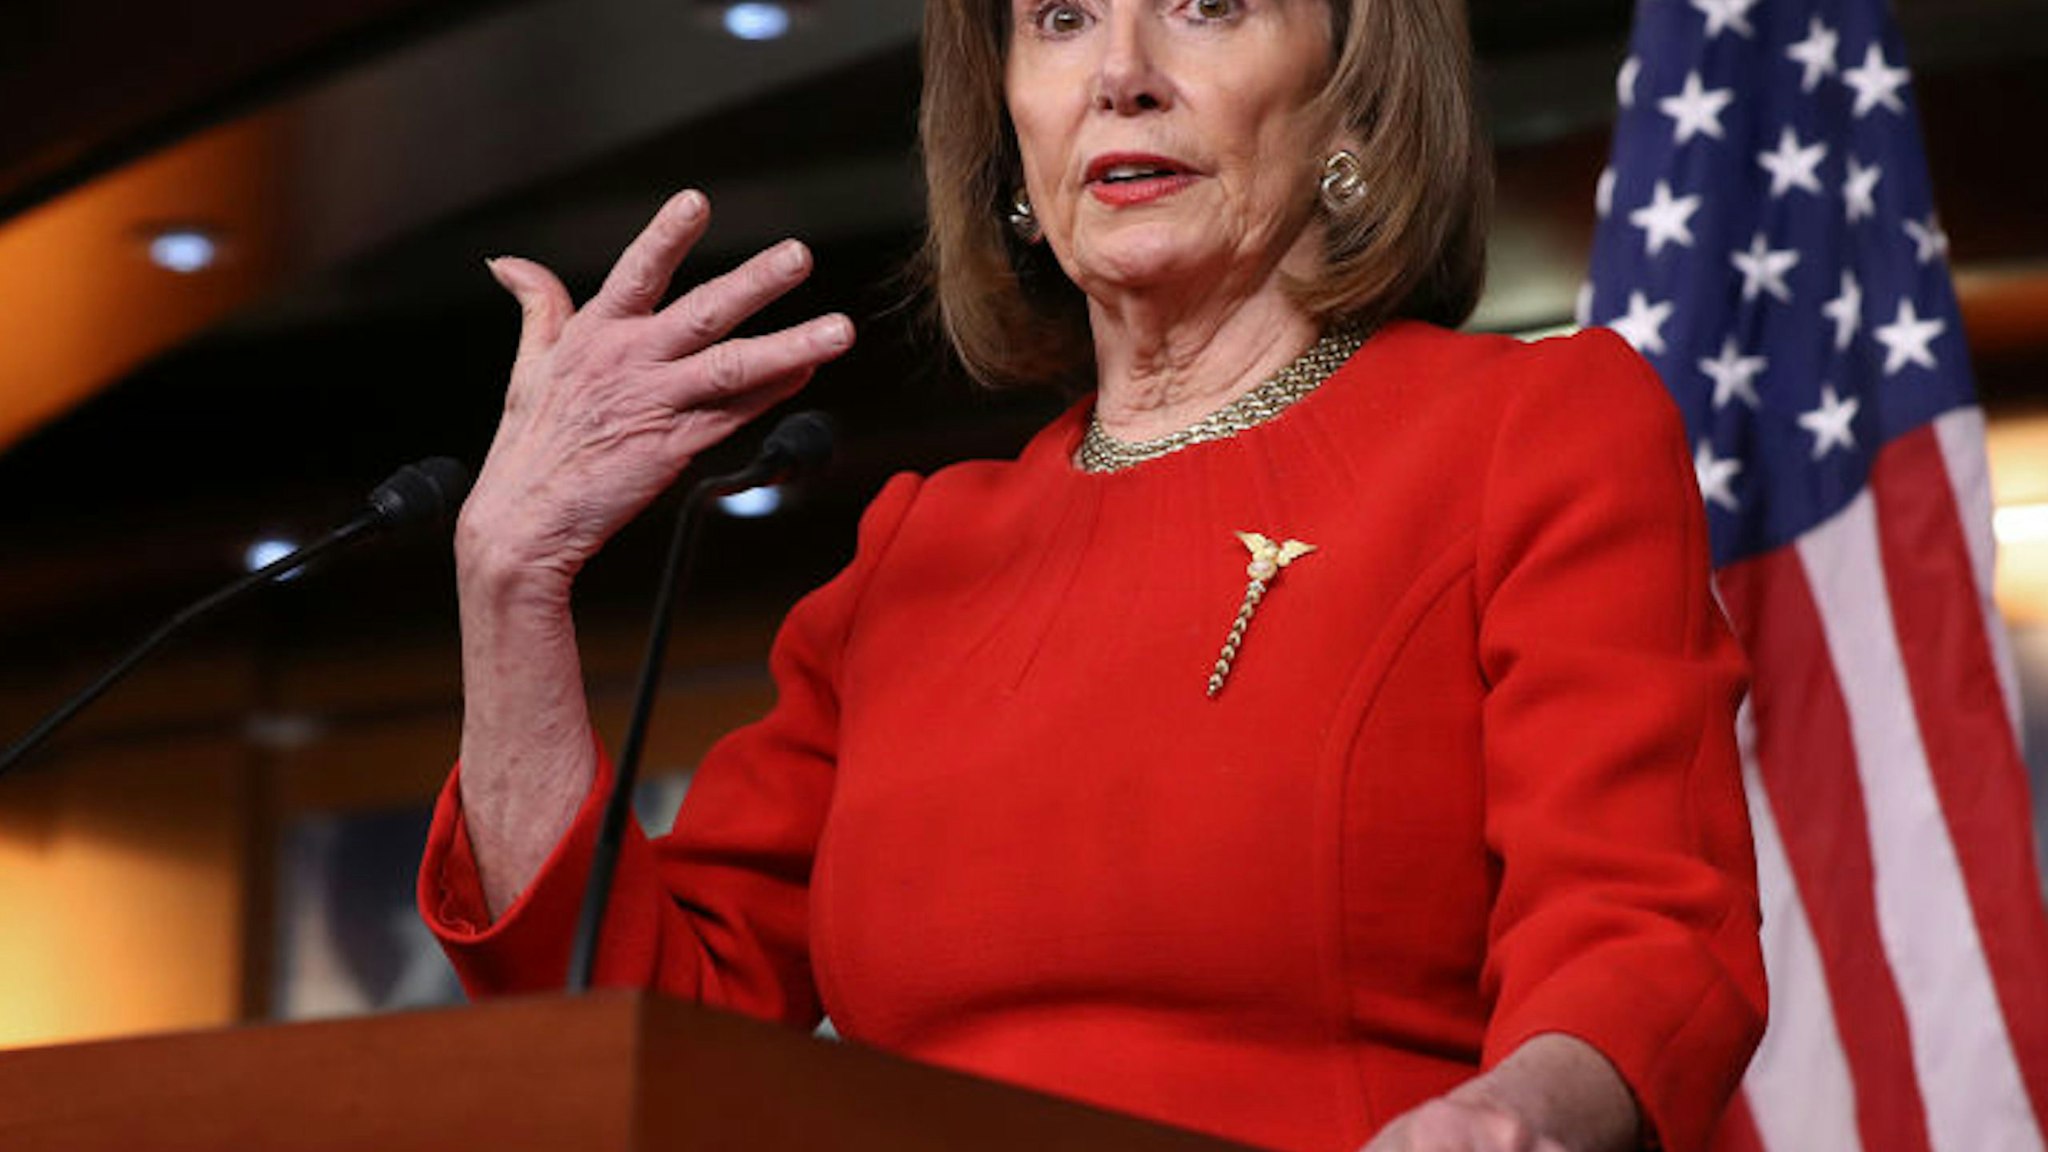 WASHINGTON, DC - DECEMBER 19: Speaker of the House Nancy Pelosi (D-CA) holds her weekly news conference at the U.S. Capitol December 19, 2019 in Washington, DC. Pelosi has not set the number of managers she will assign to President Donald Trump's impeachment trial and has not said when she will send the articles over to the U.S. Senate